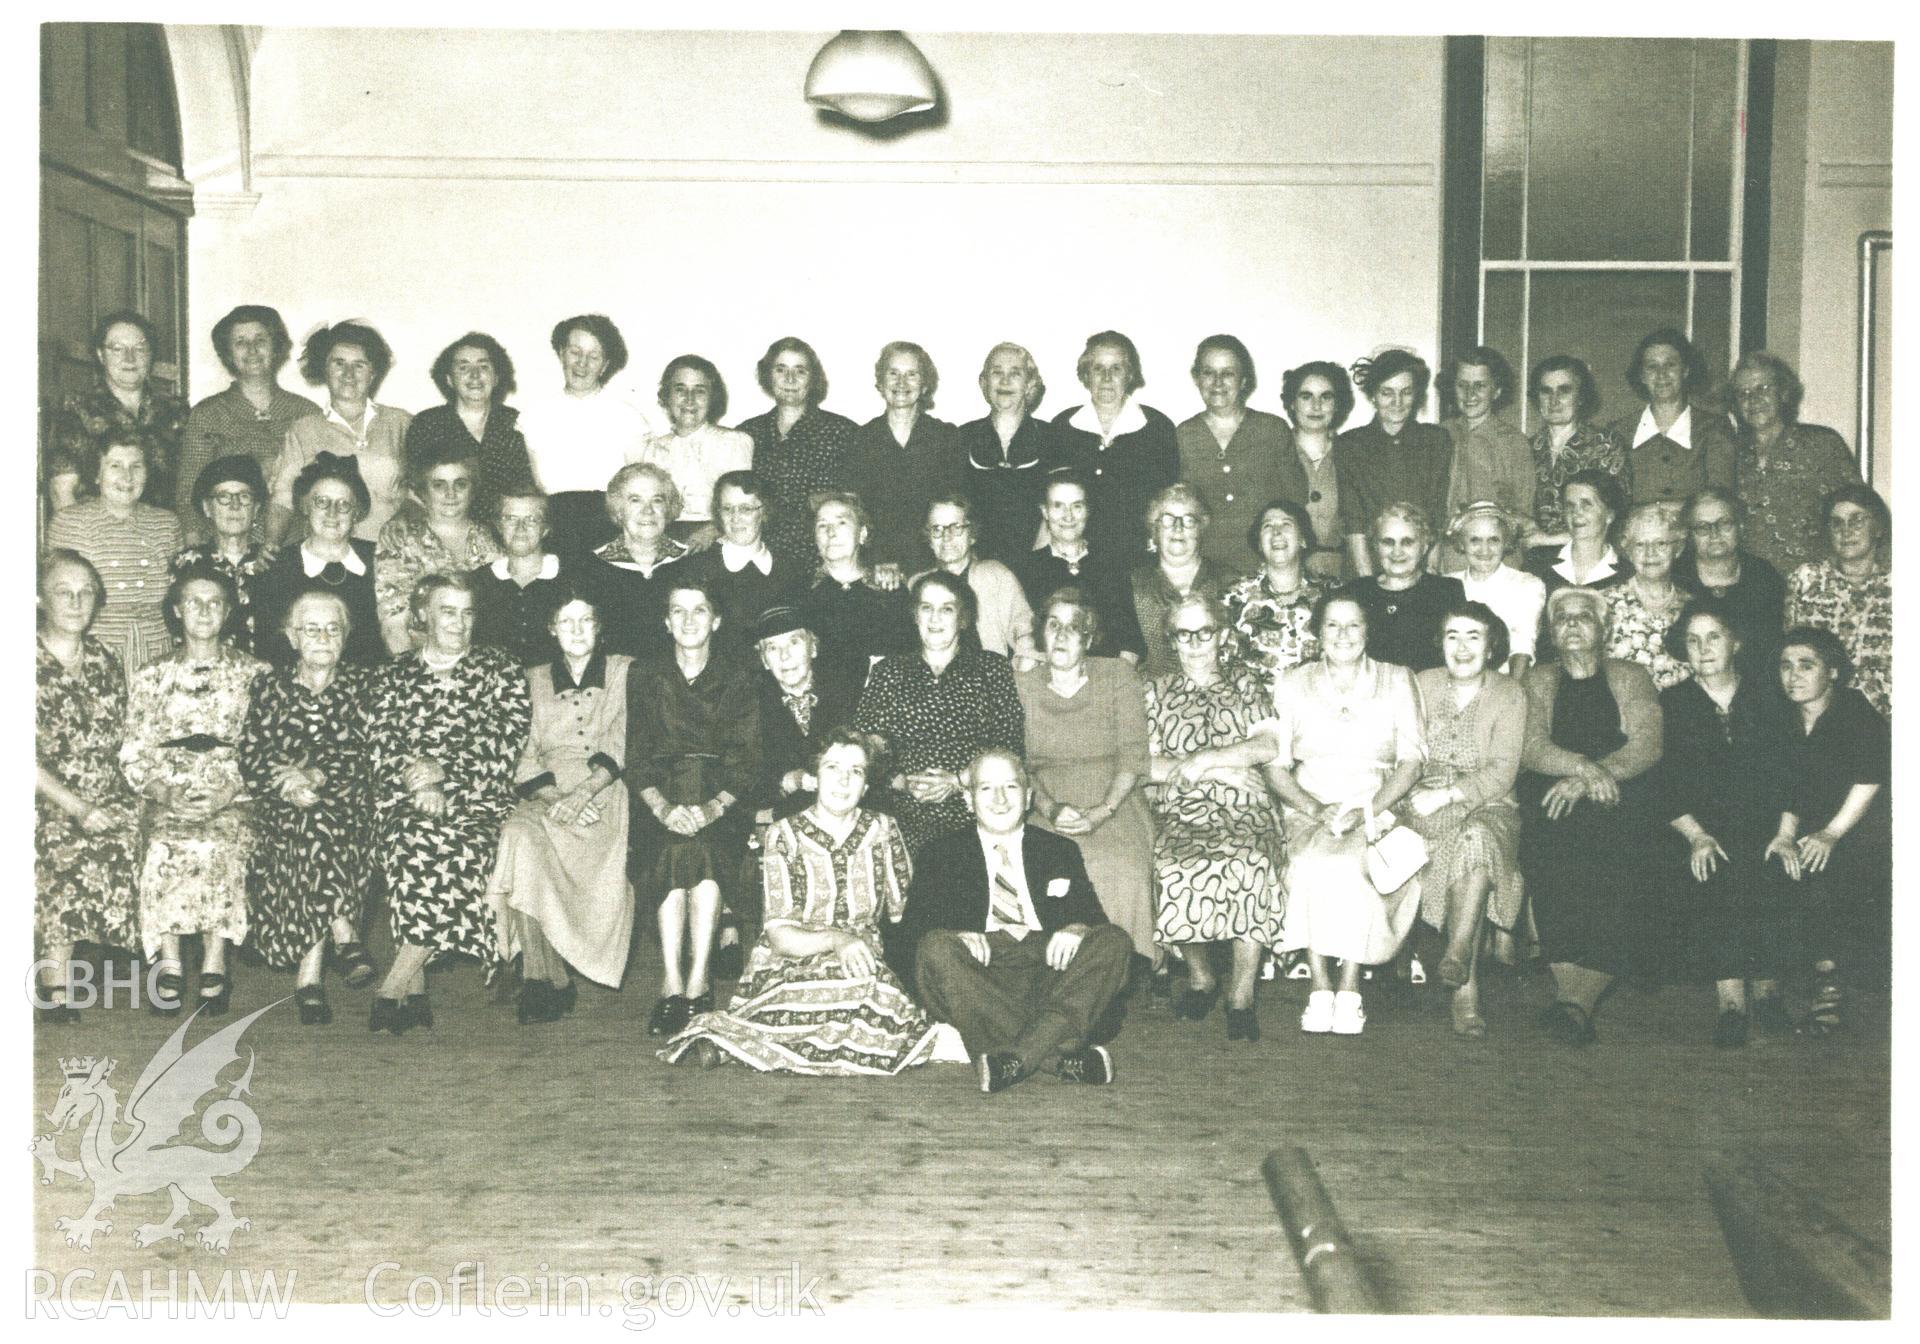 Black and white photograph of the Lady's Guild, in the vestry with Geraint Owen's wife, circa 1948 - 1949. Donated to the RCAHMW by Cyril Philips as part of the Digital Dissent Project.